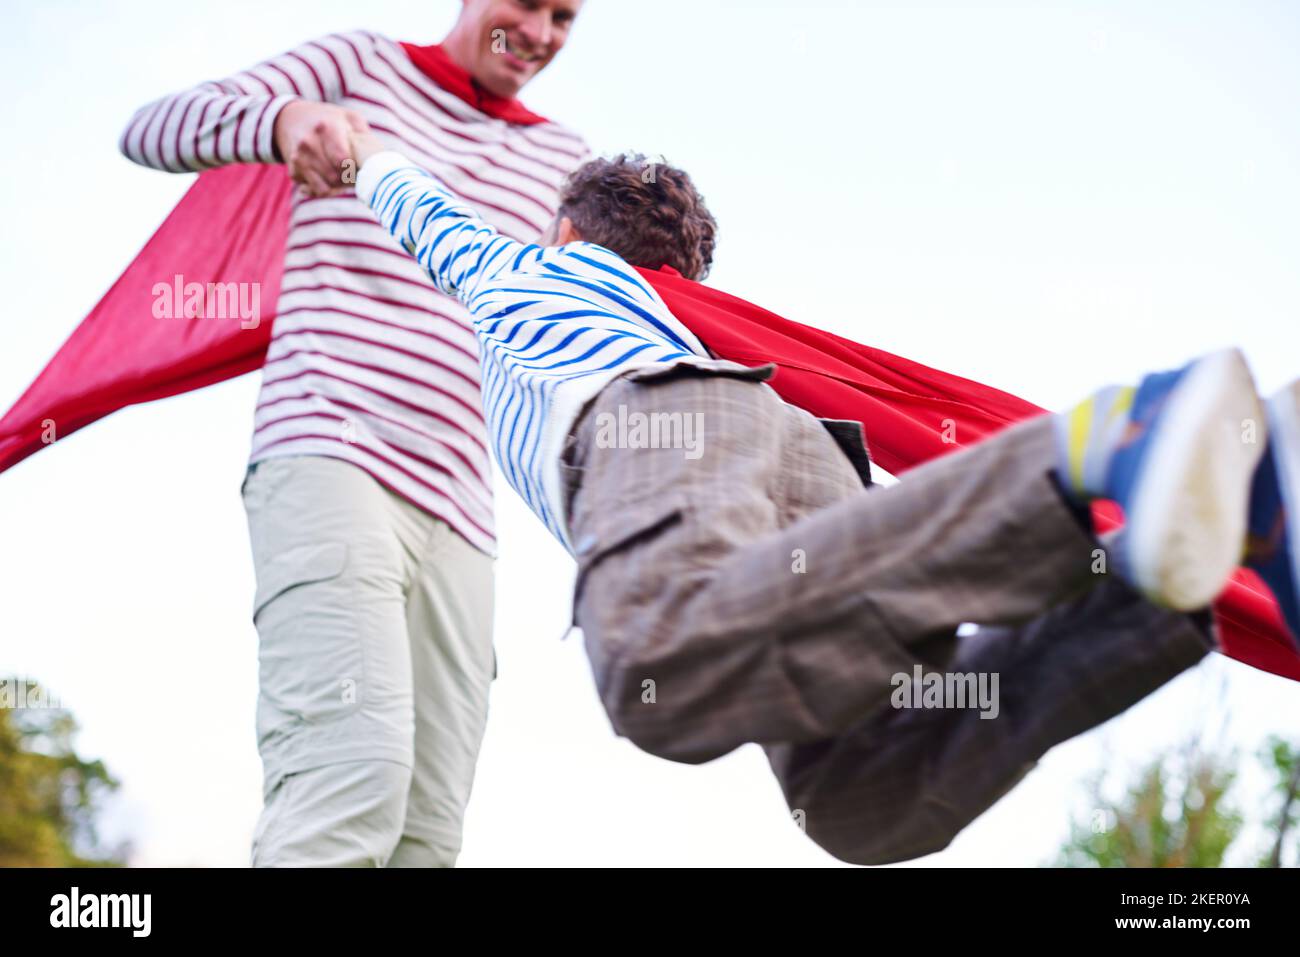 We have liftoff. a father and his young son pretending to be superheroes while playing outdoors. Stock Photo